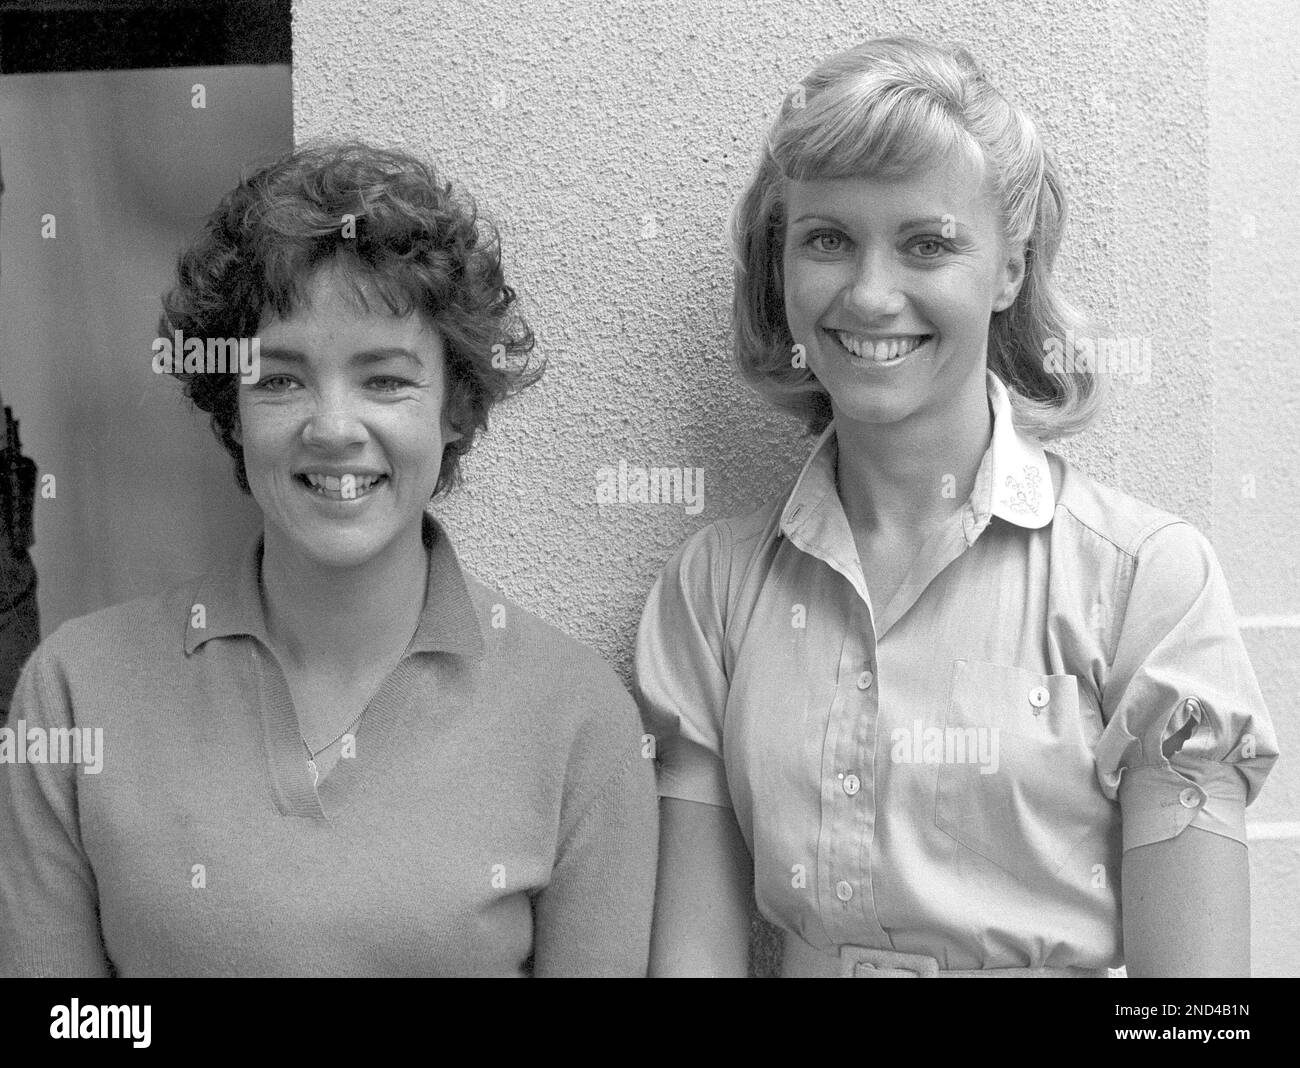 Actresses and co-stars Stockard Channing, left, and Olivia Newton-John ready themselves for their roles in the movie version of "Grease," in Los Angeles, Aug. 30, 1977. Ms. Channing and Ms. Newton-John star with John Travolta in the film. (AP Photo/Nick Ut) Stock Photo